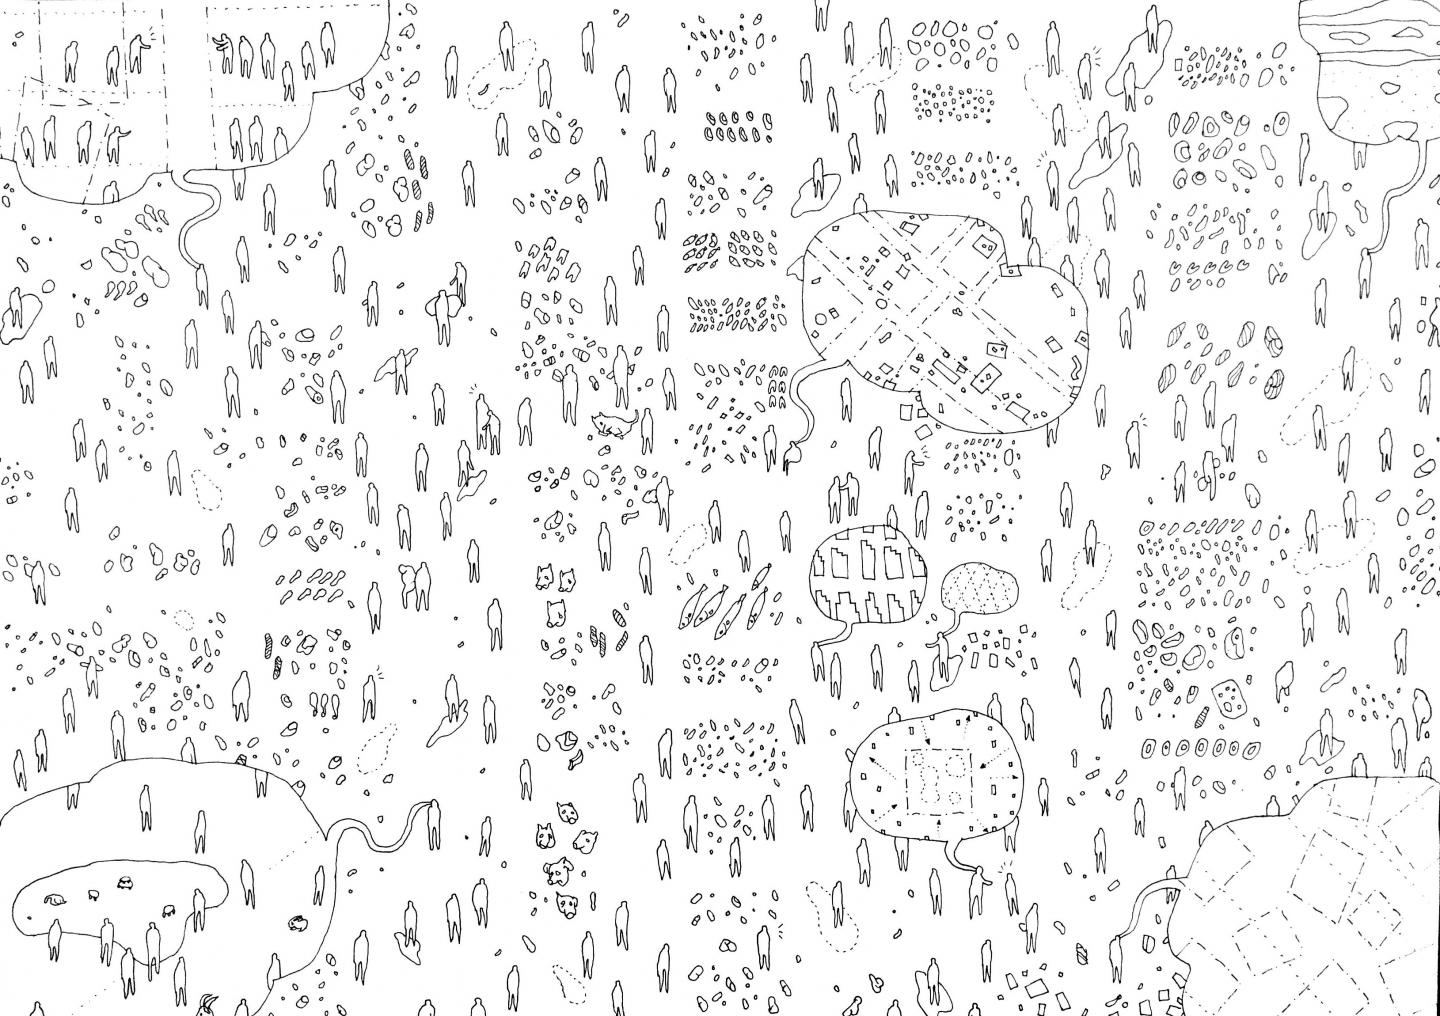 A white background with black pen sketches of random people figures scattered around.